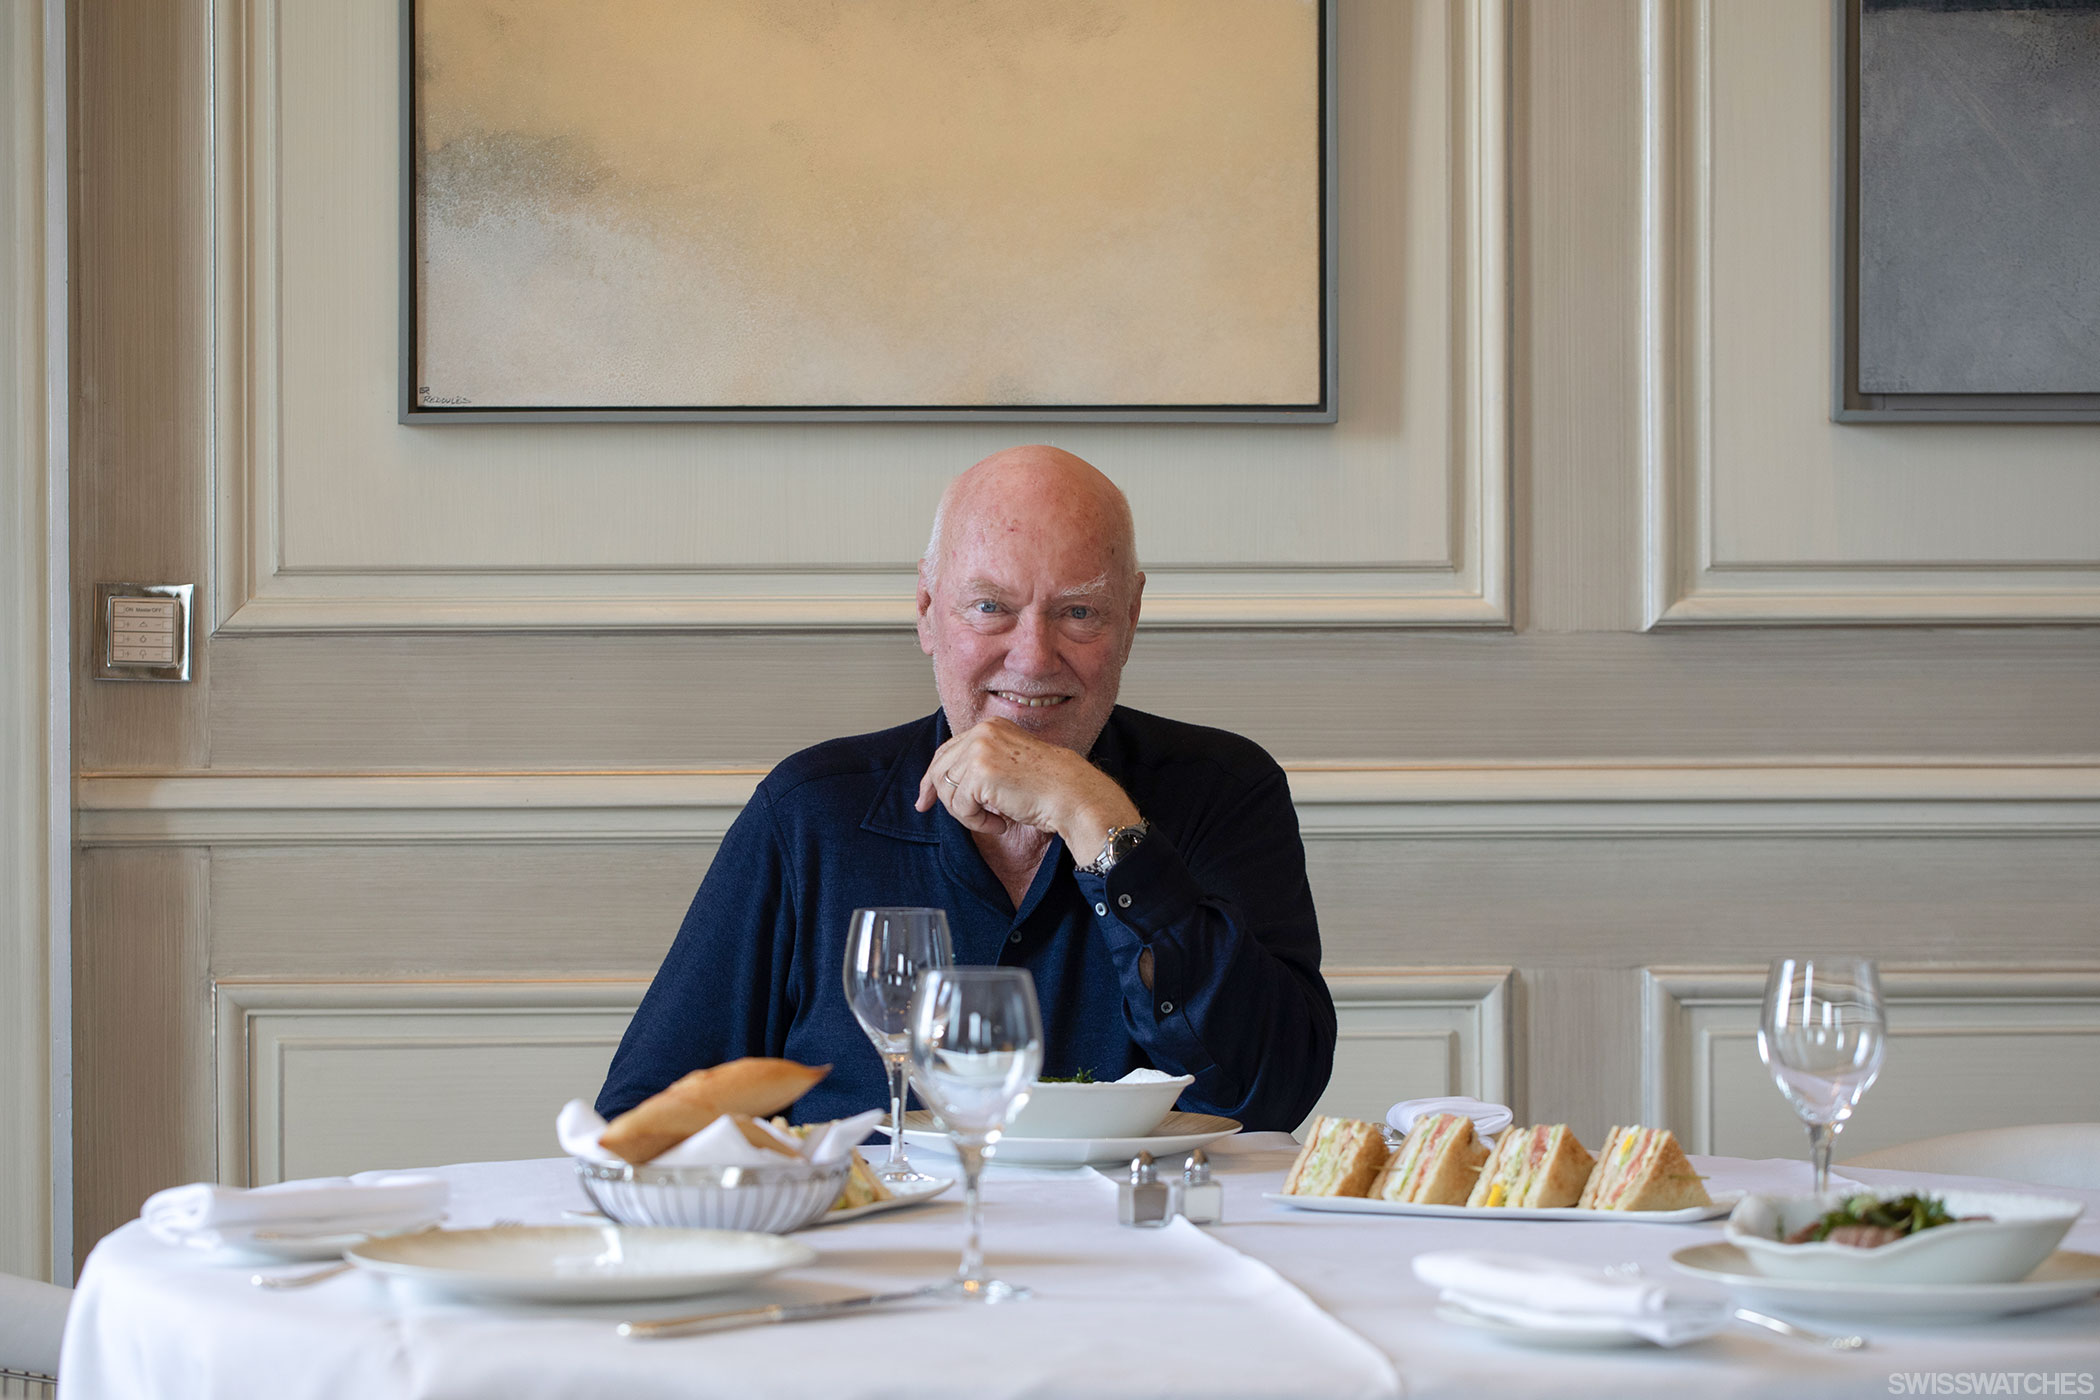 A must-see: Jean-Claude Biver's private watch collection presented